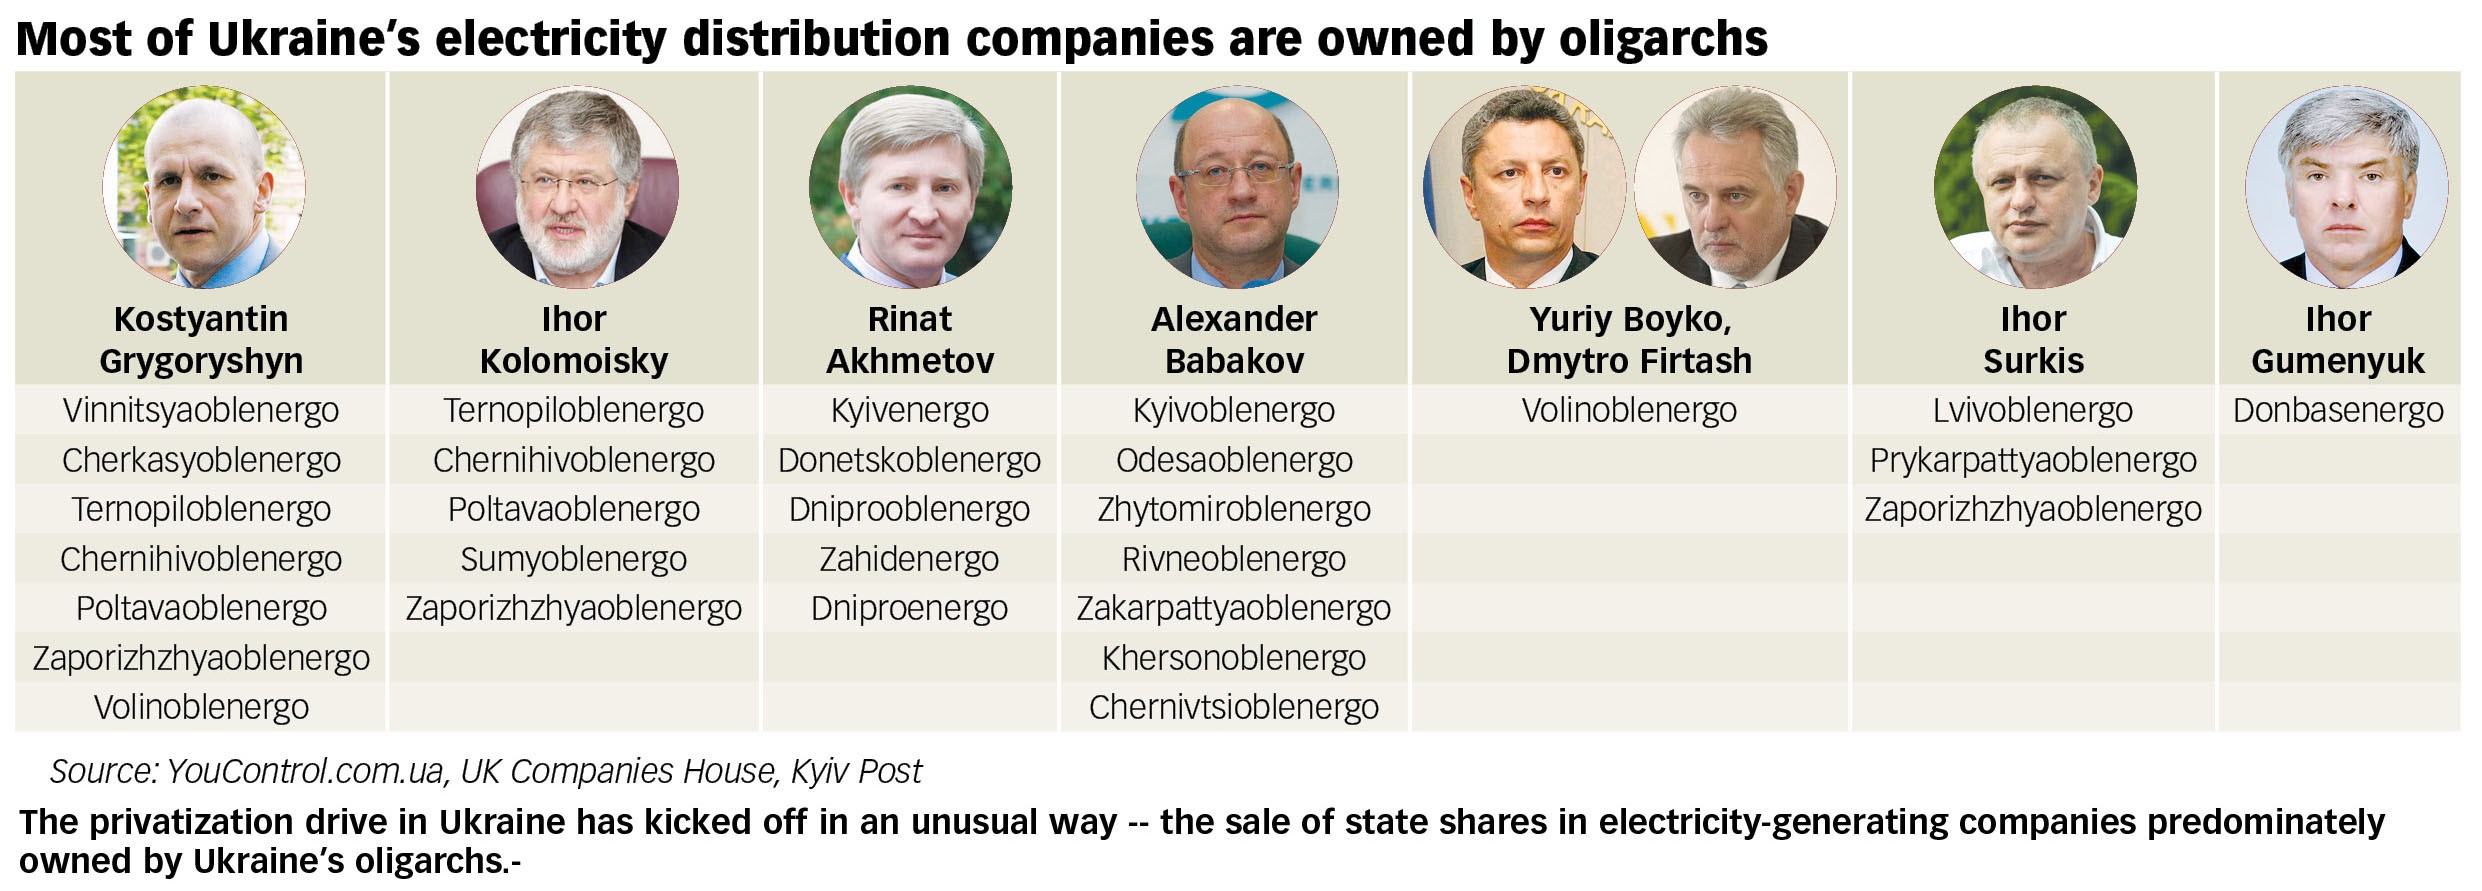 The privatization drive in Ukraine has kicked off in an unusual way -- the sale of state shares in electricity-generating companies predominately owned by Ukraine’s oligarchs.